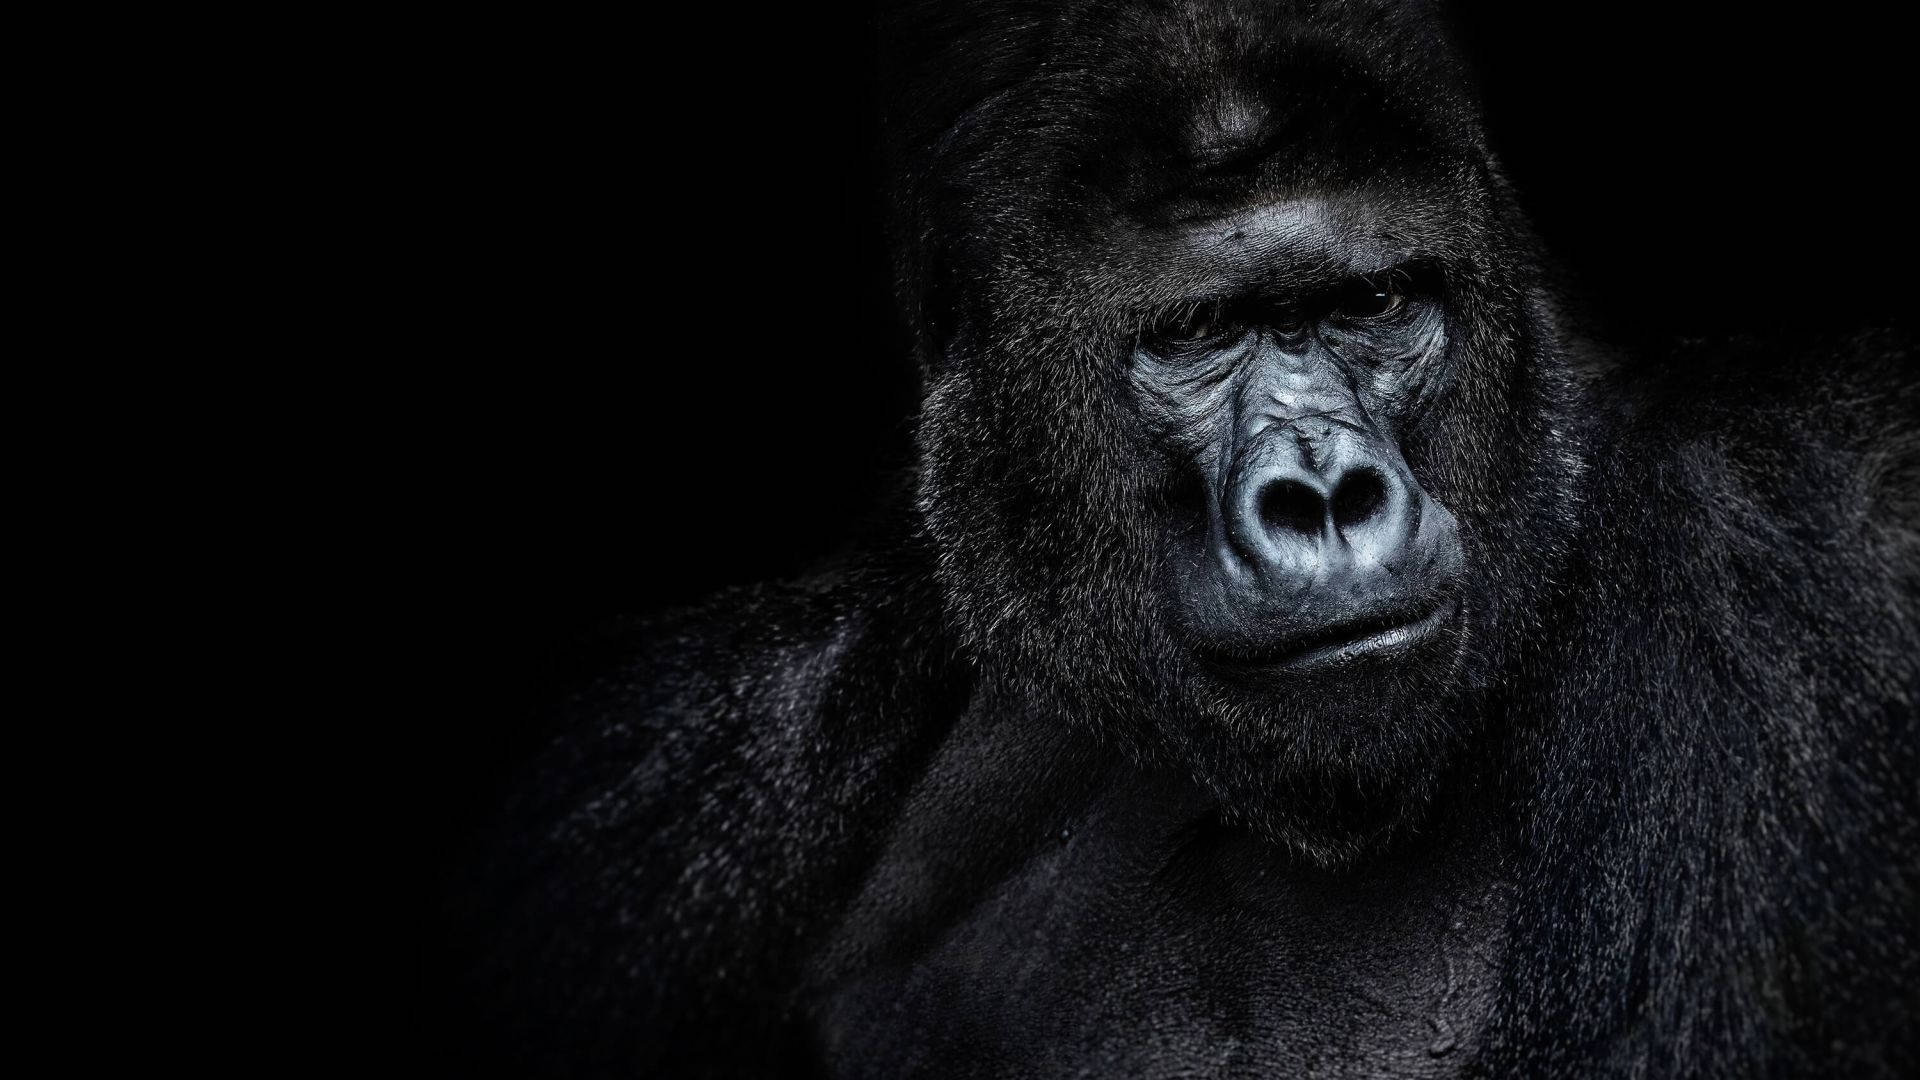 A Gorilla Is Looking At The Camera In A Dark Background Wallpaper